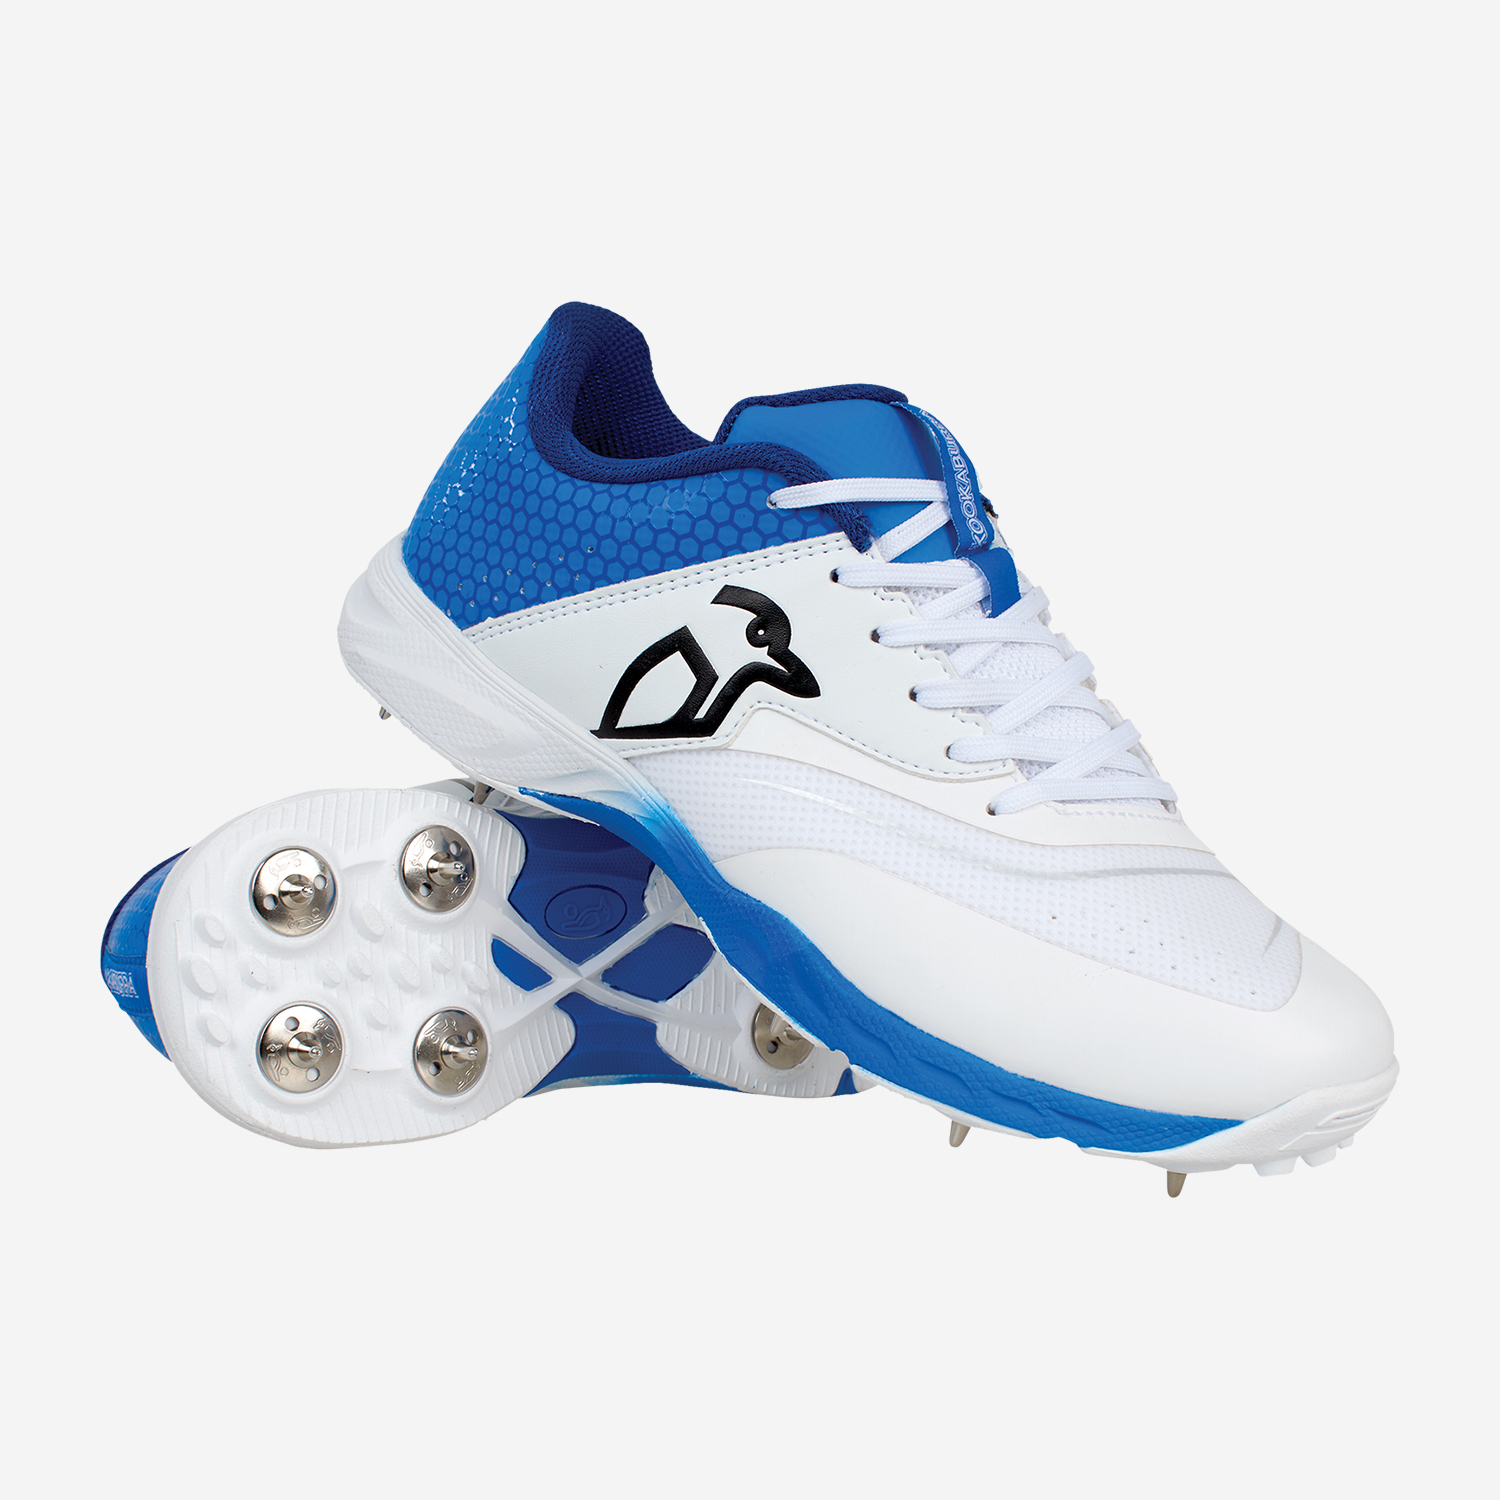 How To Choose The Right Cricket Shoes For You?